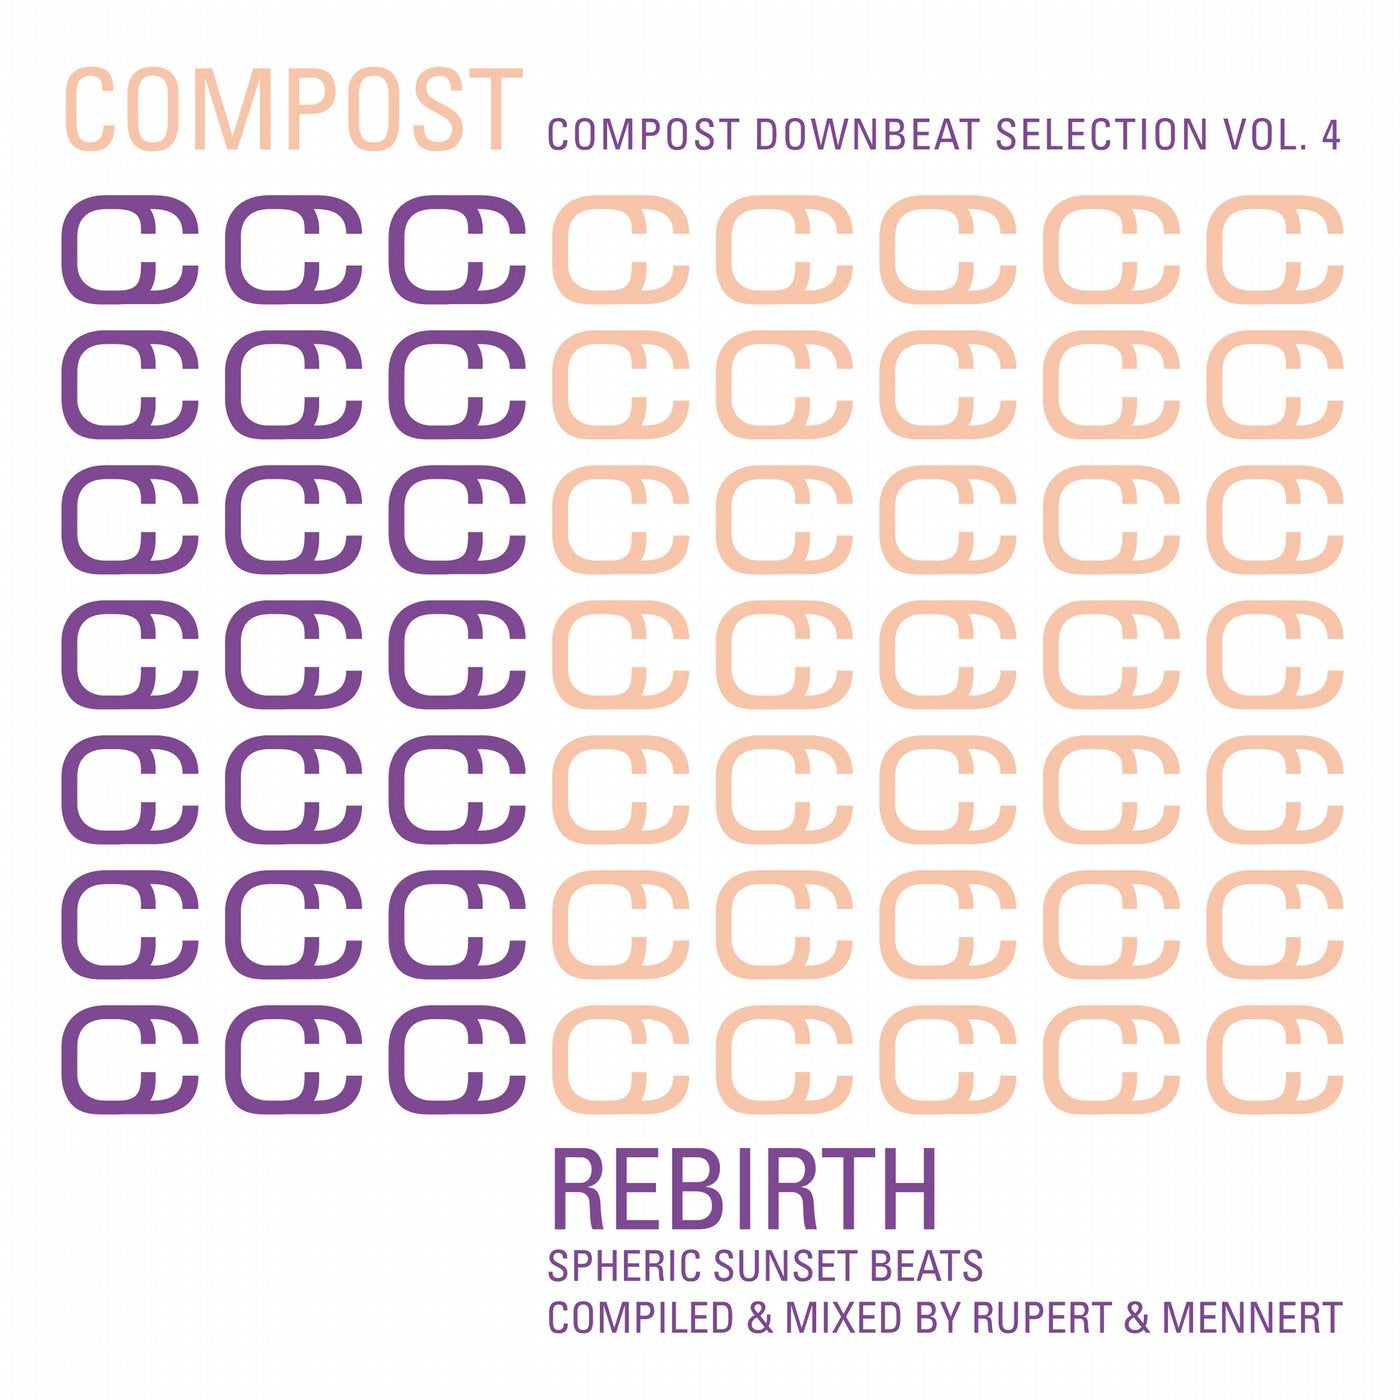 Compost Downbeat Selection Vol. 4 - Rebirth - Spheric Sunset Beats - Compiled & Mixed By Rupert & Mennert